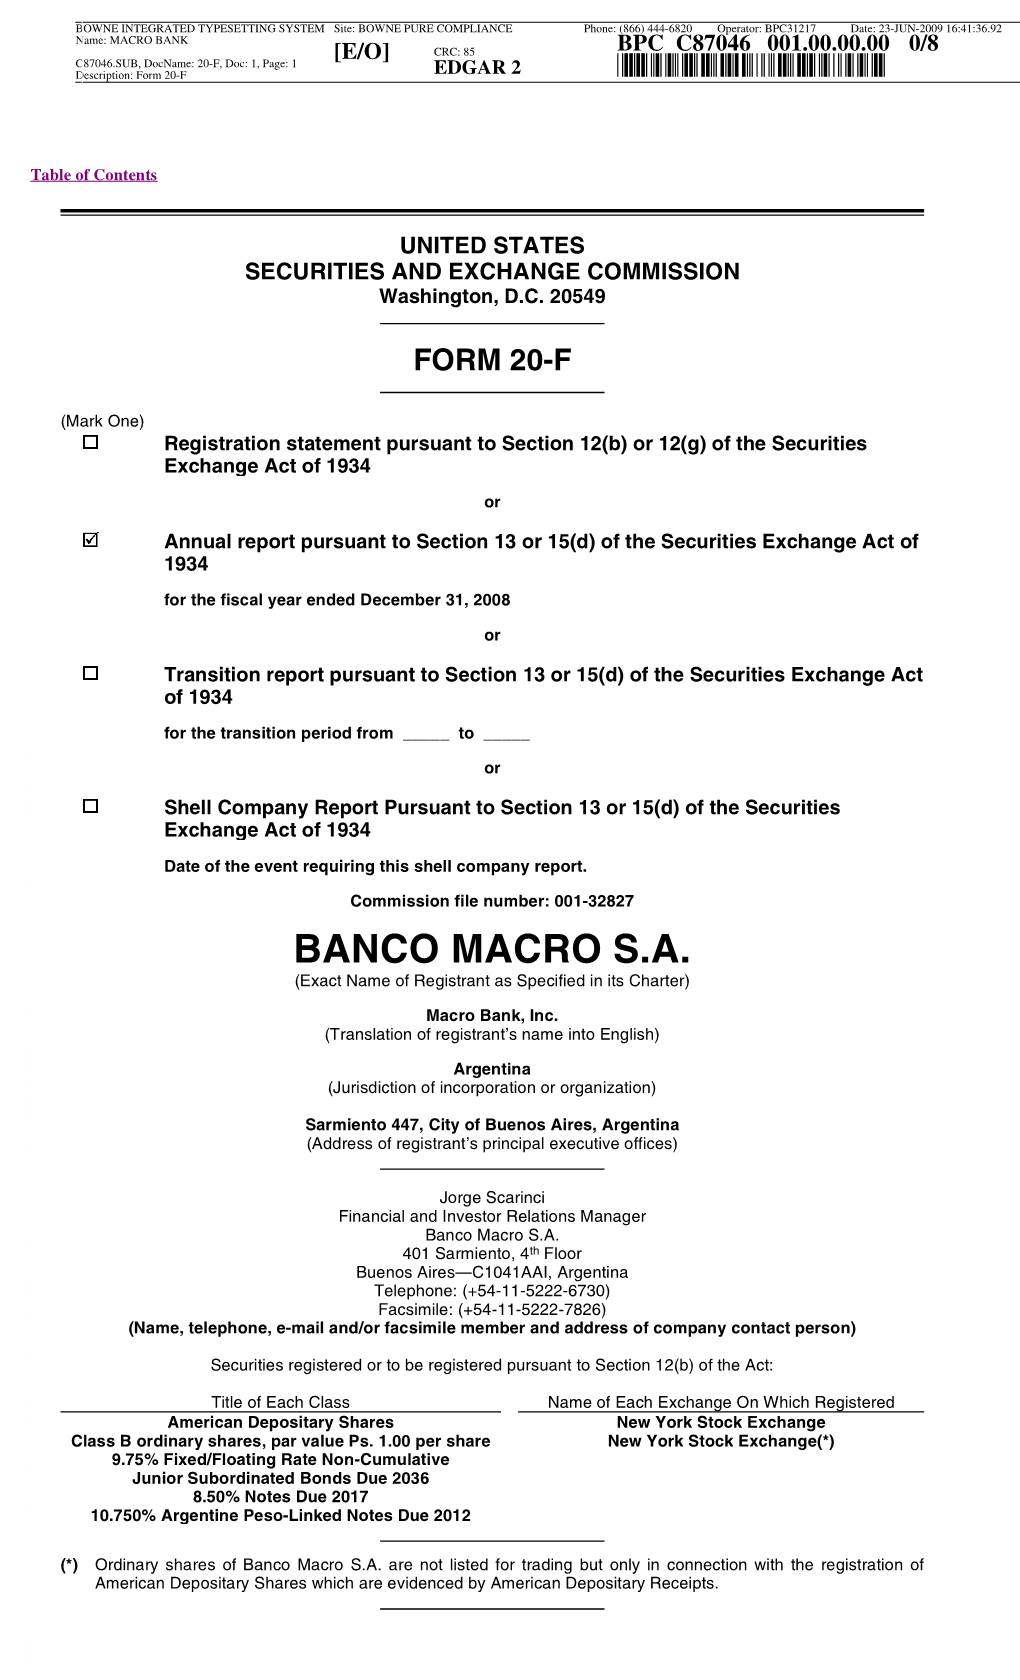 BANCO MACRO S.A. 001.00.00.00 (Exact Name of Registrant As Specified in Its Charter)